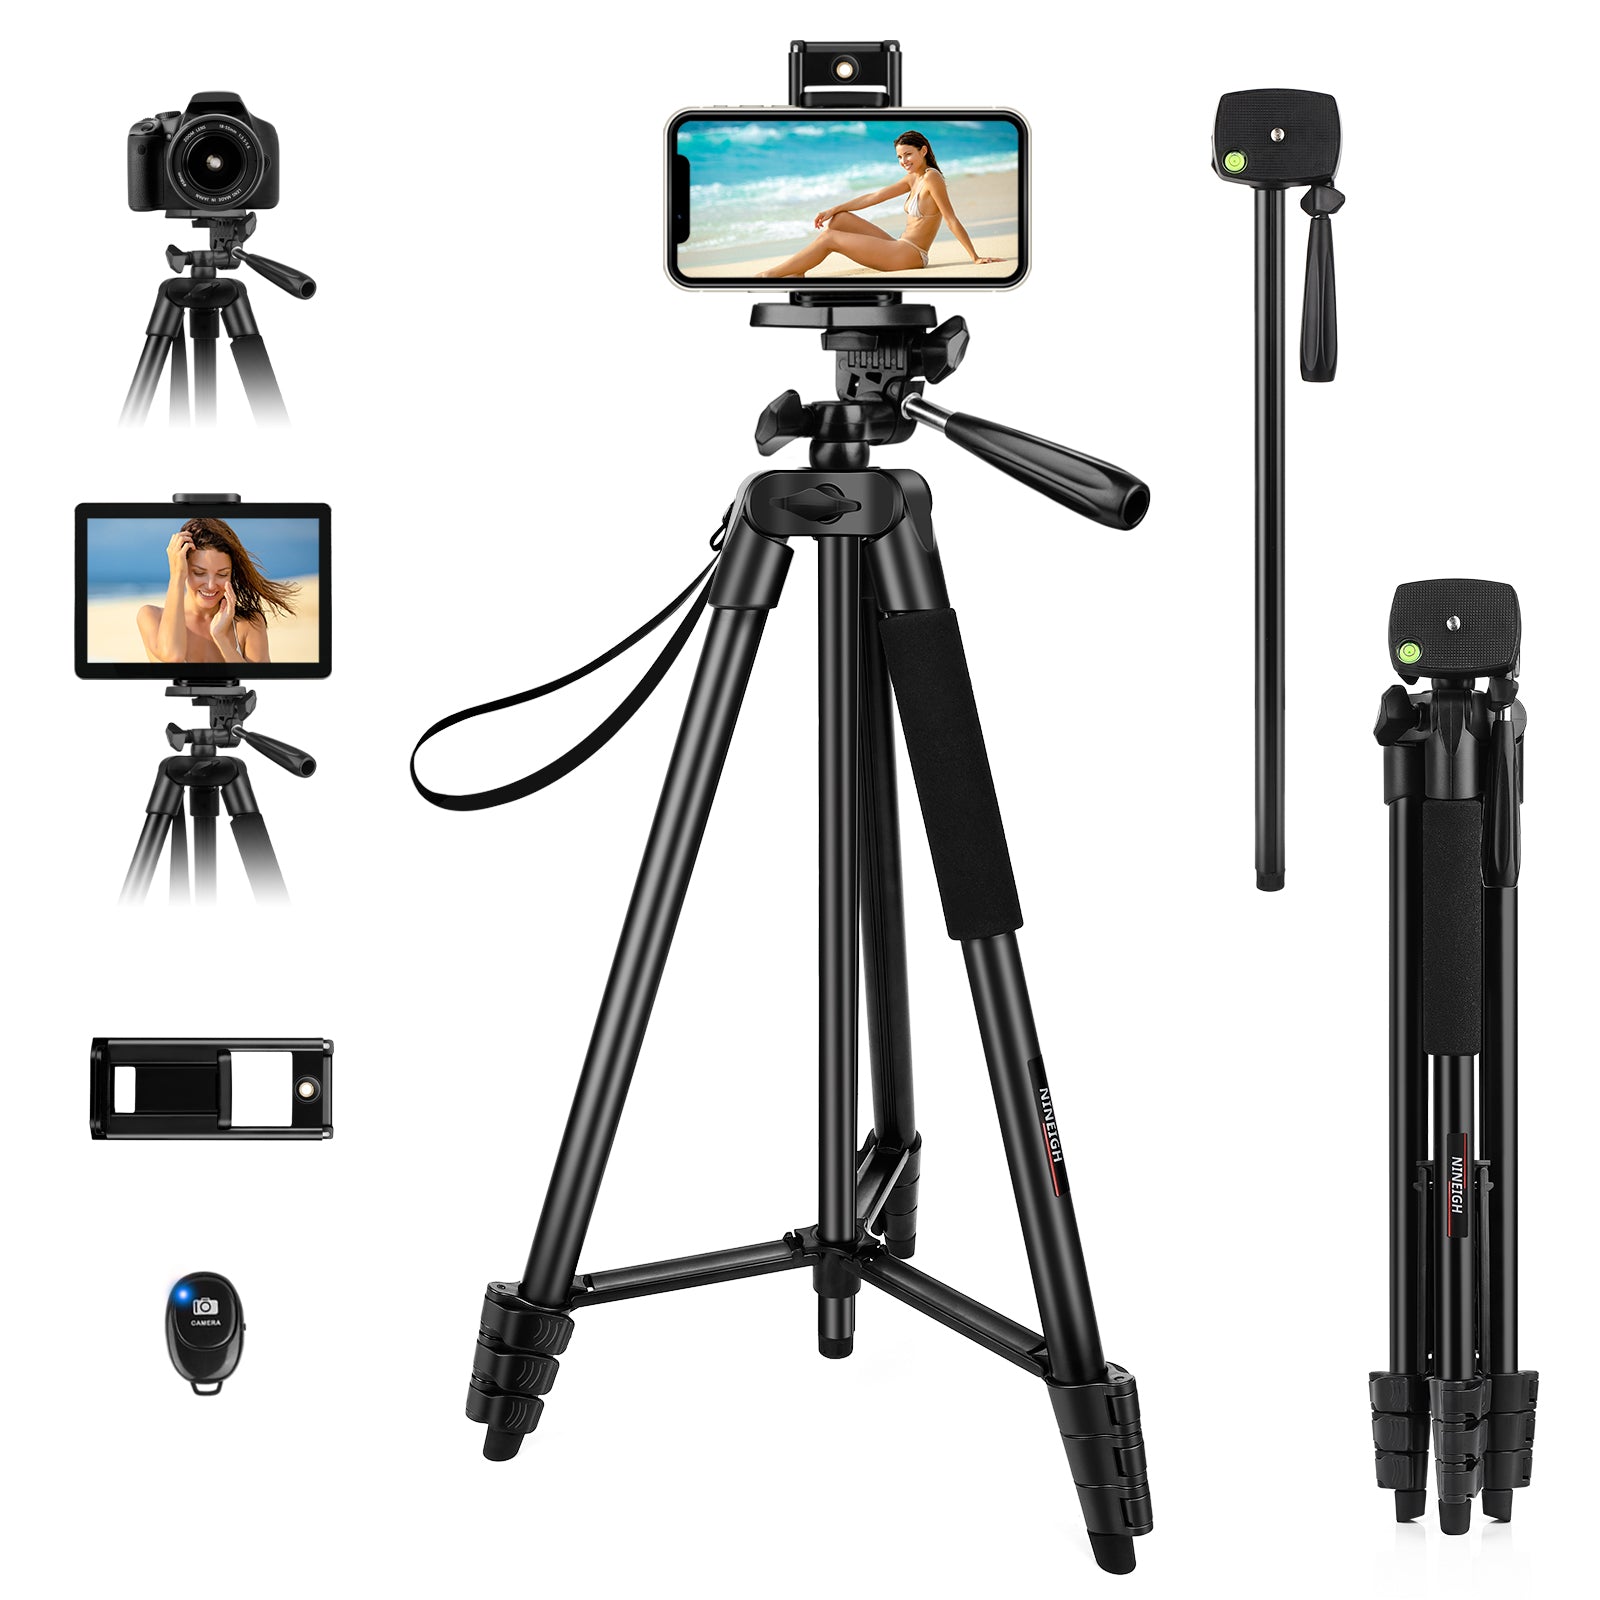 Compact Selfie Handheld Stable Tripod for Smartphone Camera DSLR